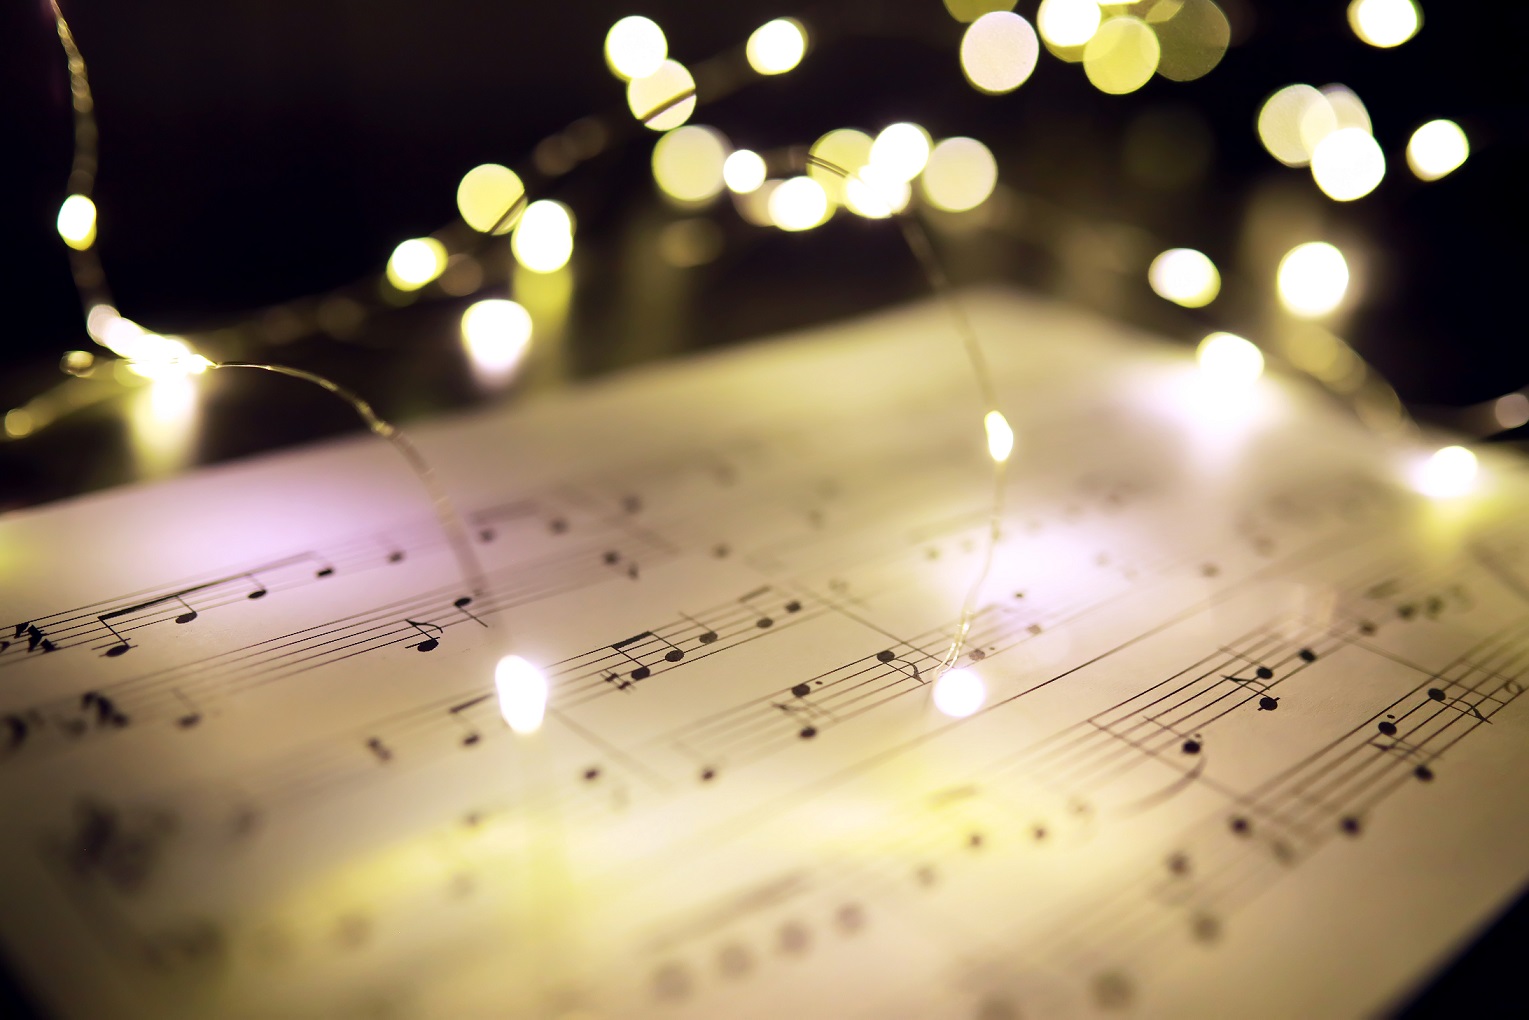 Sheet music with lights.